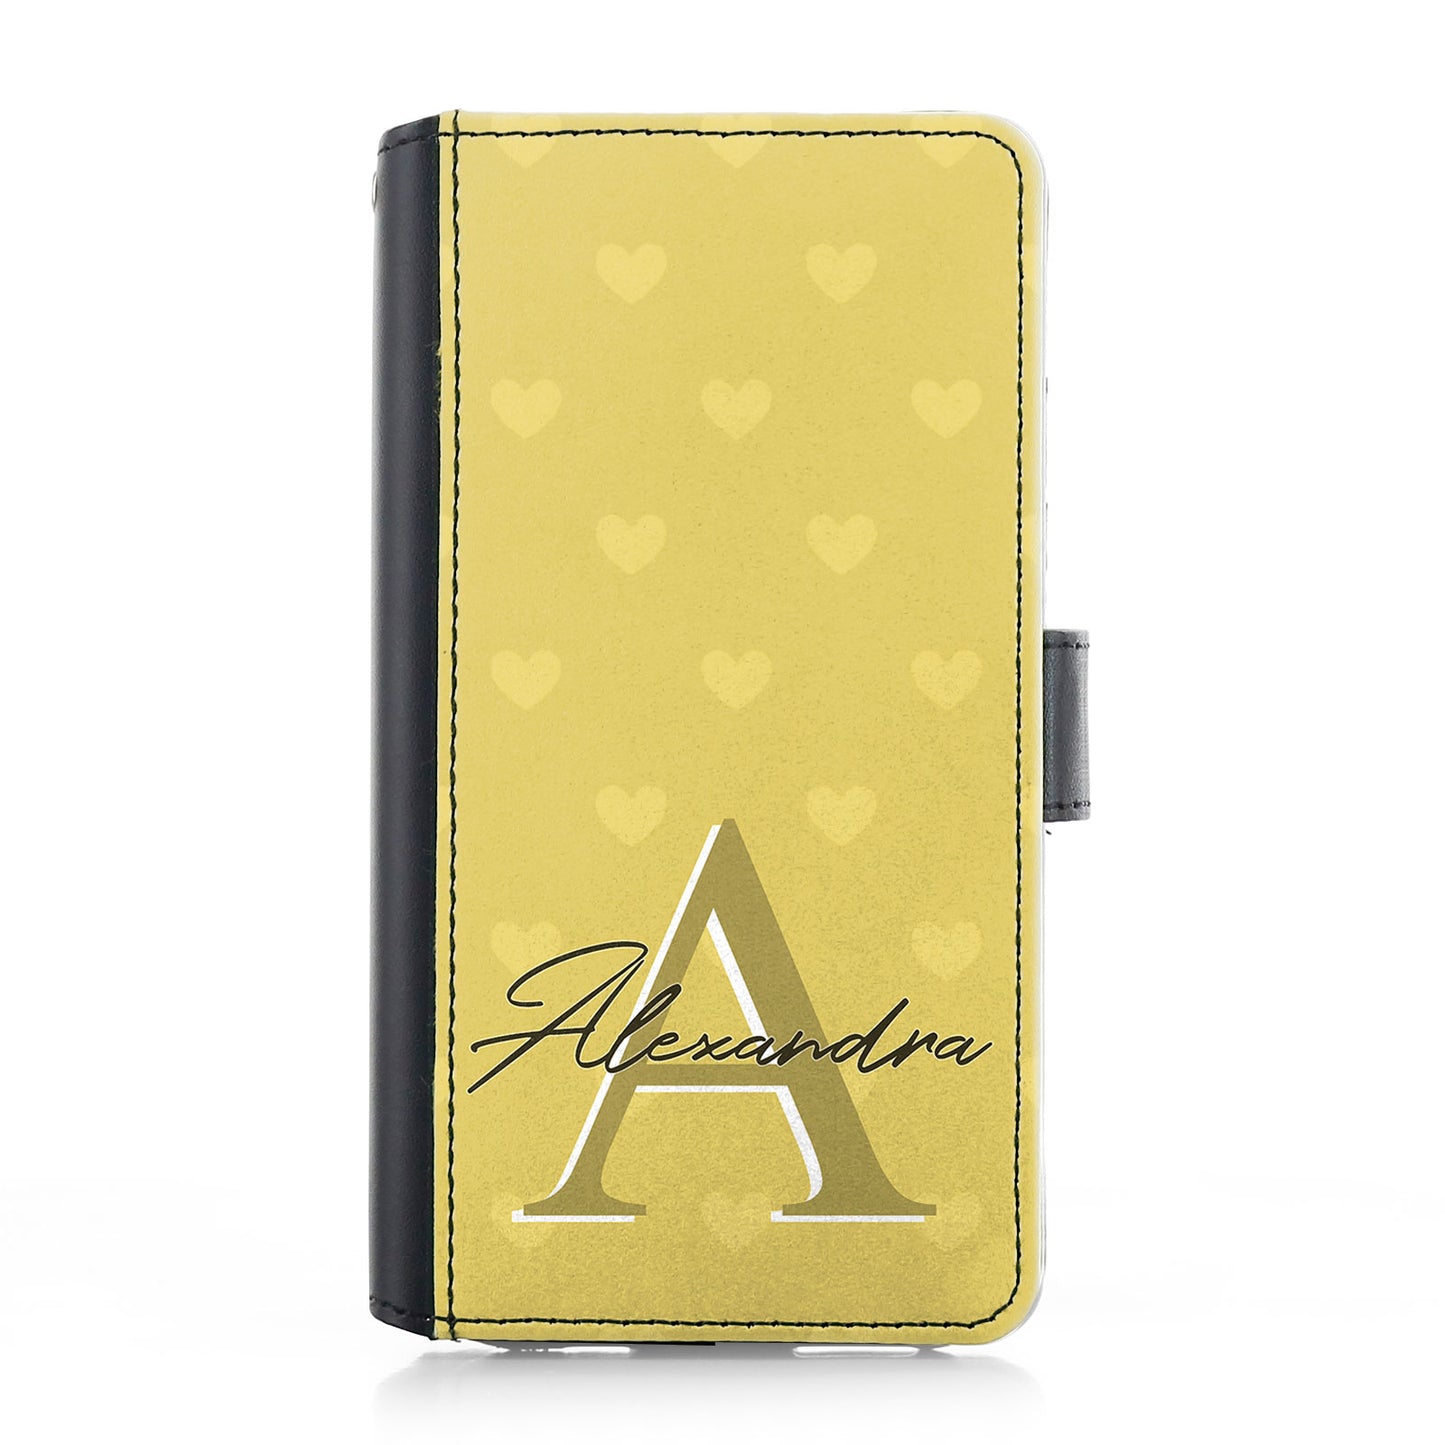 Personalised iPhone Leather Case - Yellow Heart Monogram and Name